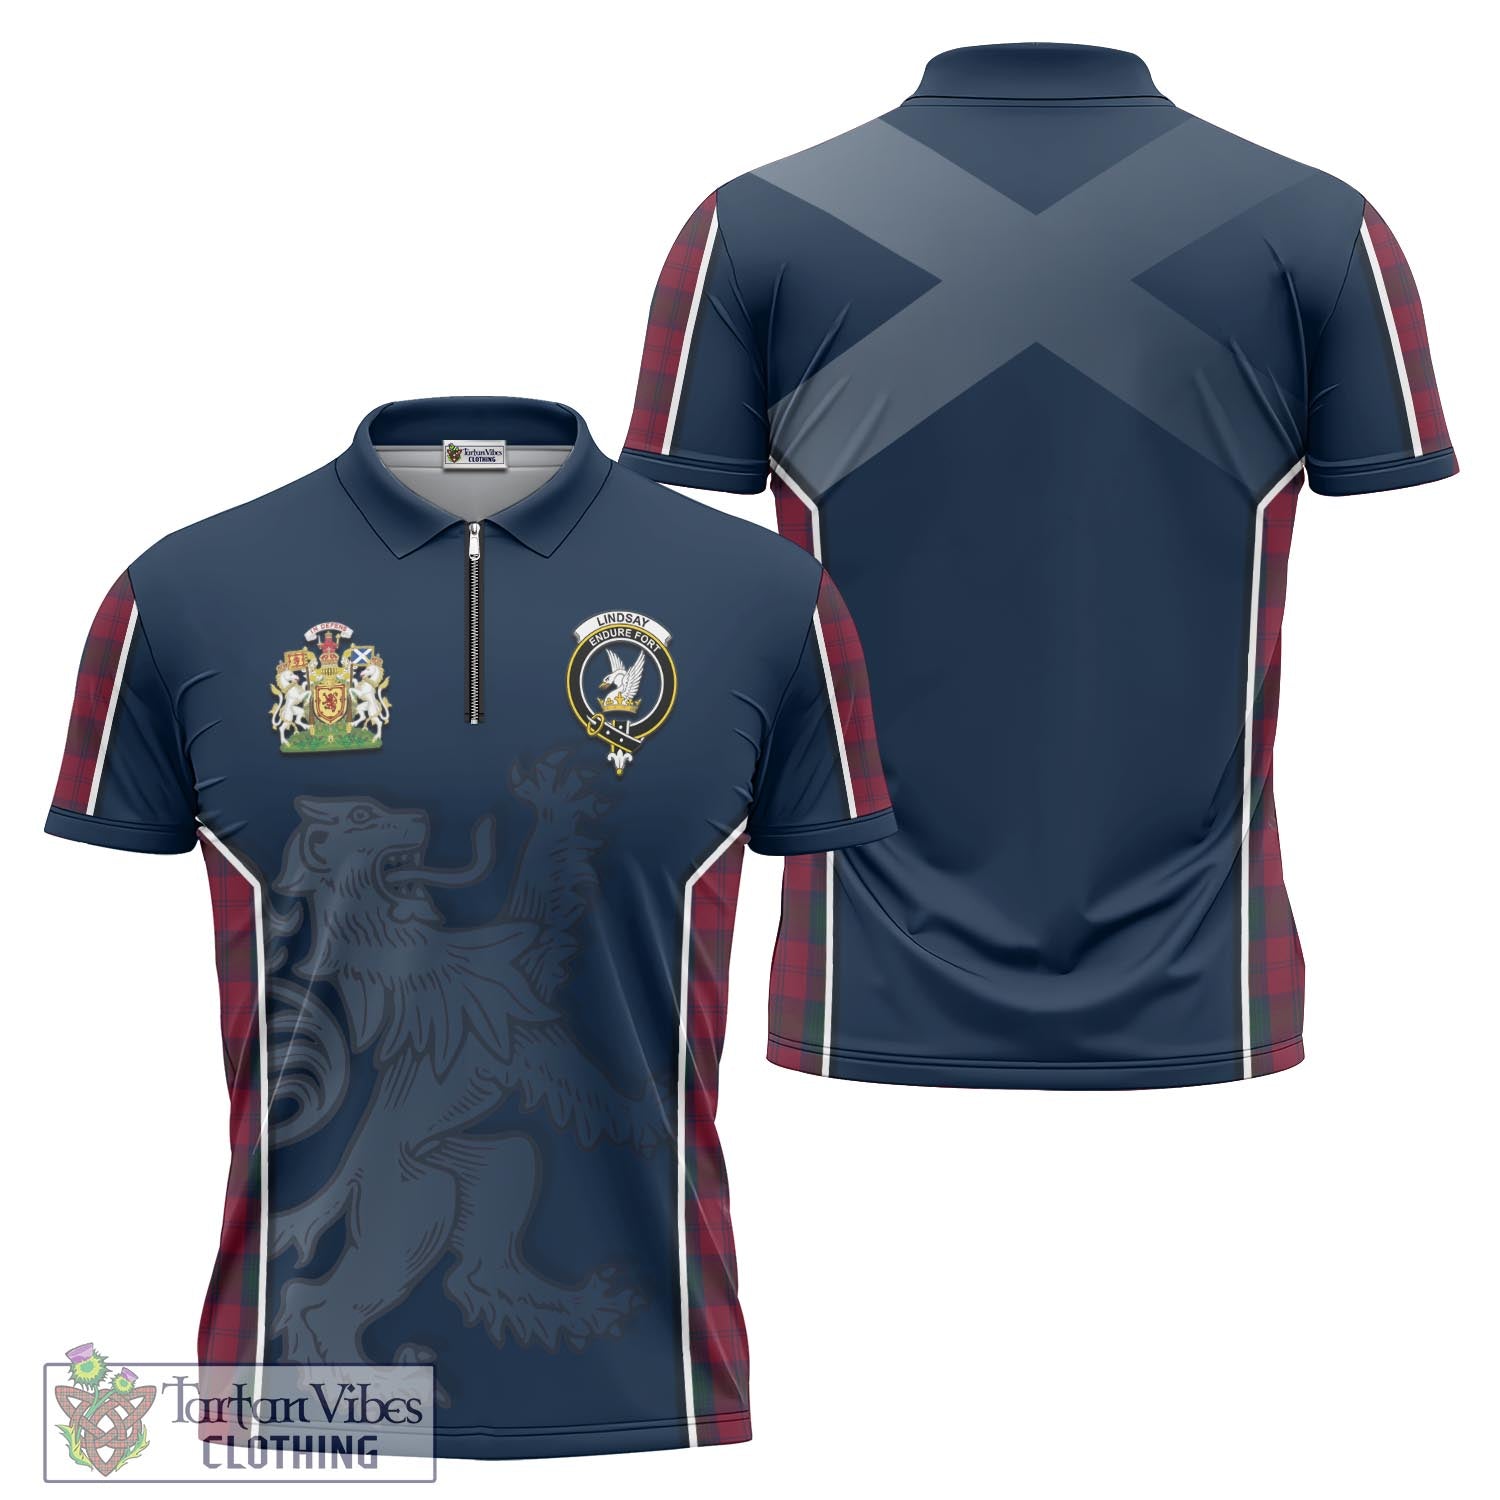 Tartan Vibes Clothing Lindsay Tartan Zipper Polo Shirt with Family Crest and Lion Rampant Vibes Sport Style